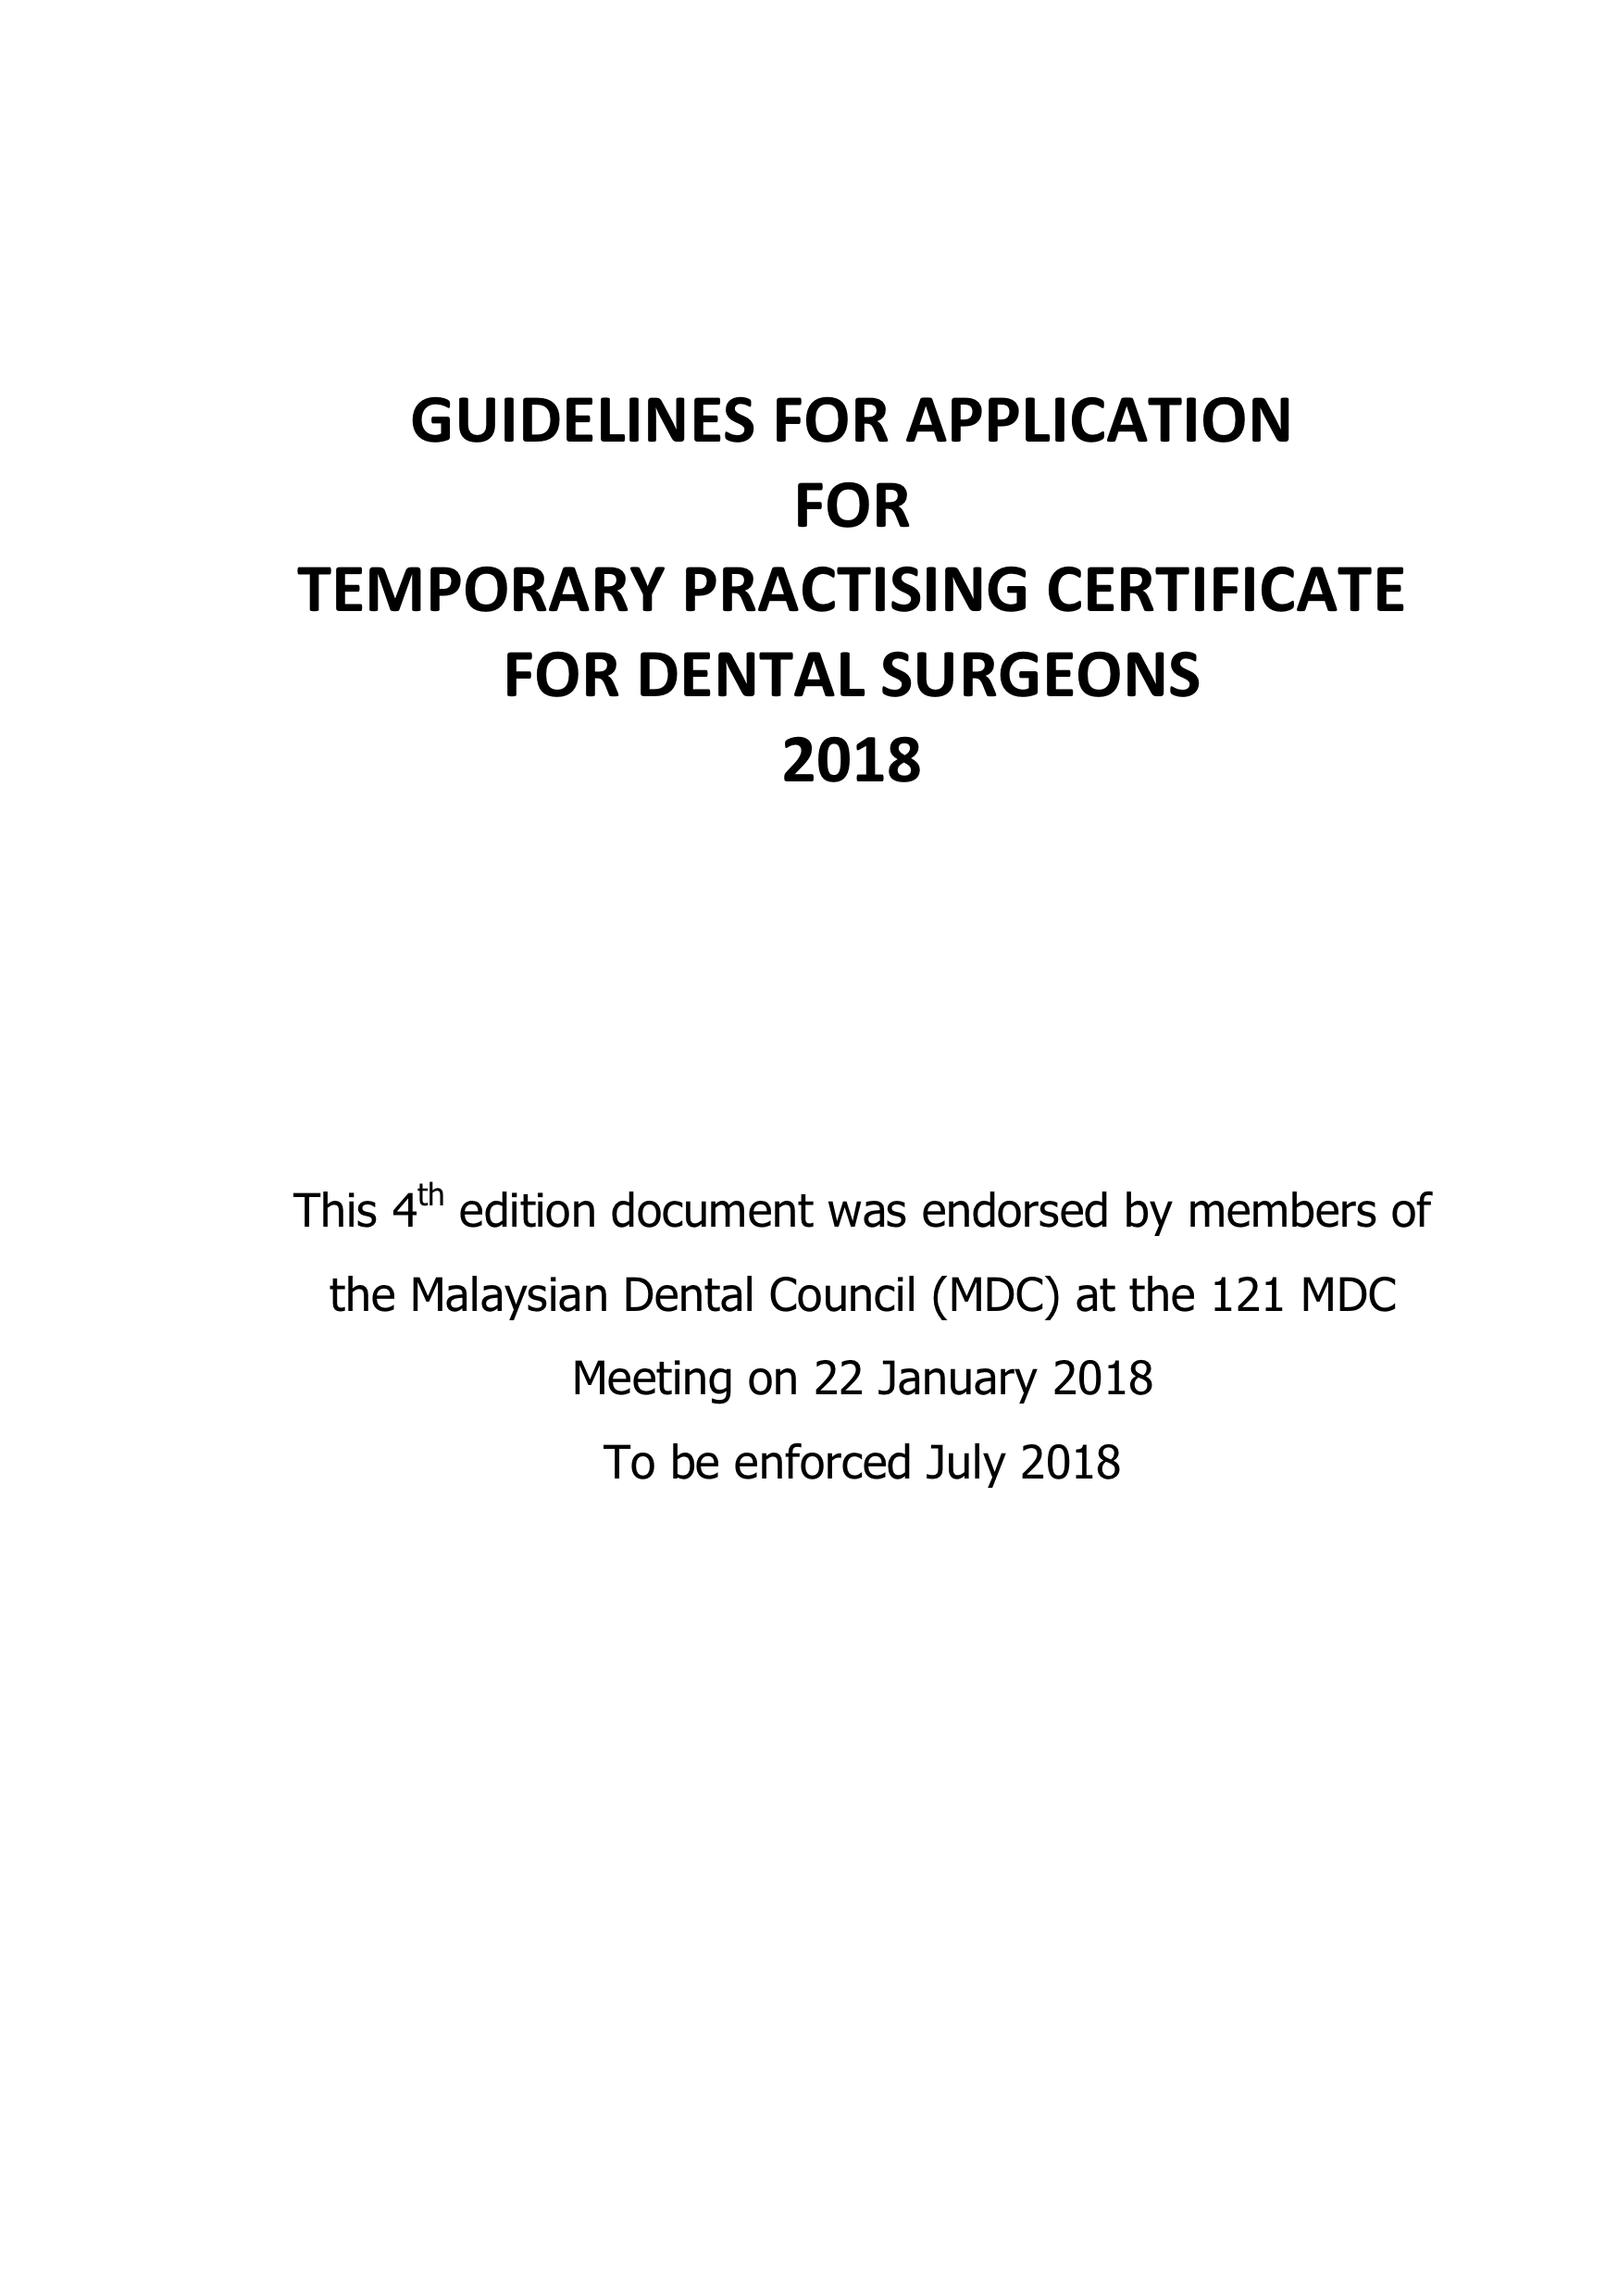 temporary-practicing-cert-guideline-malaysia-dental